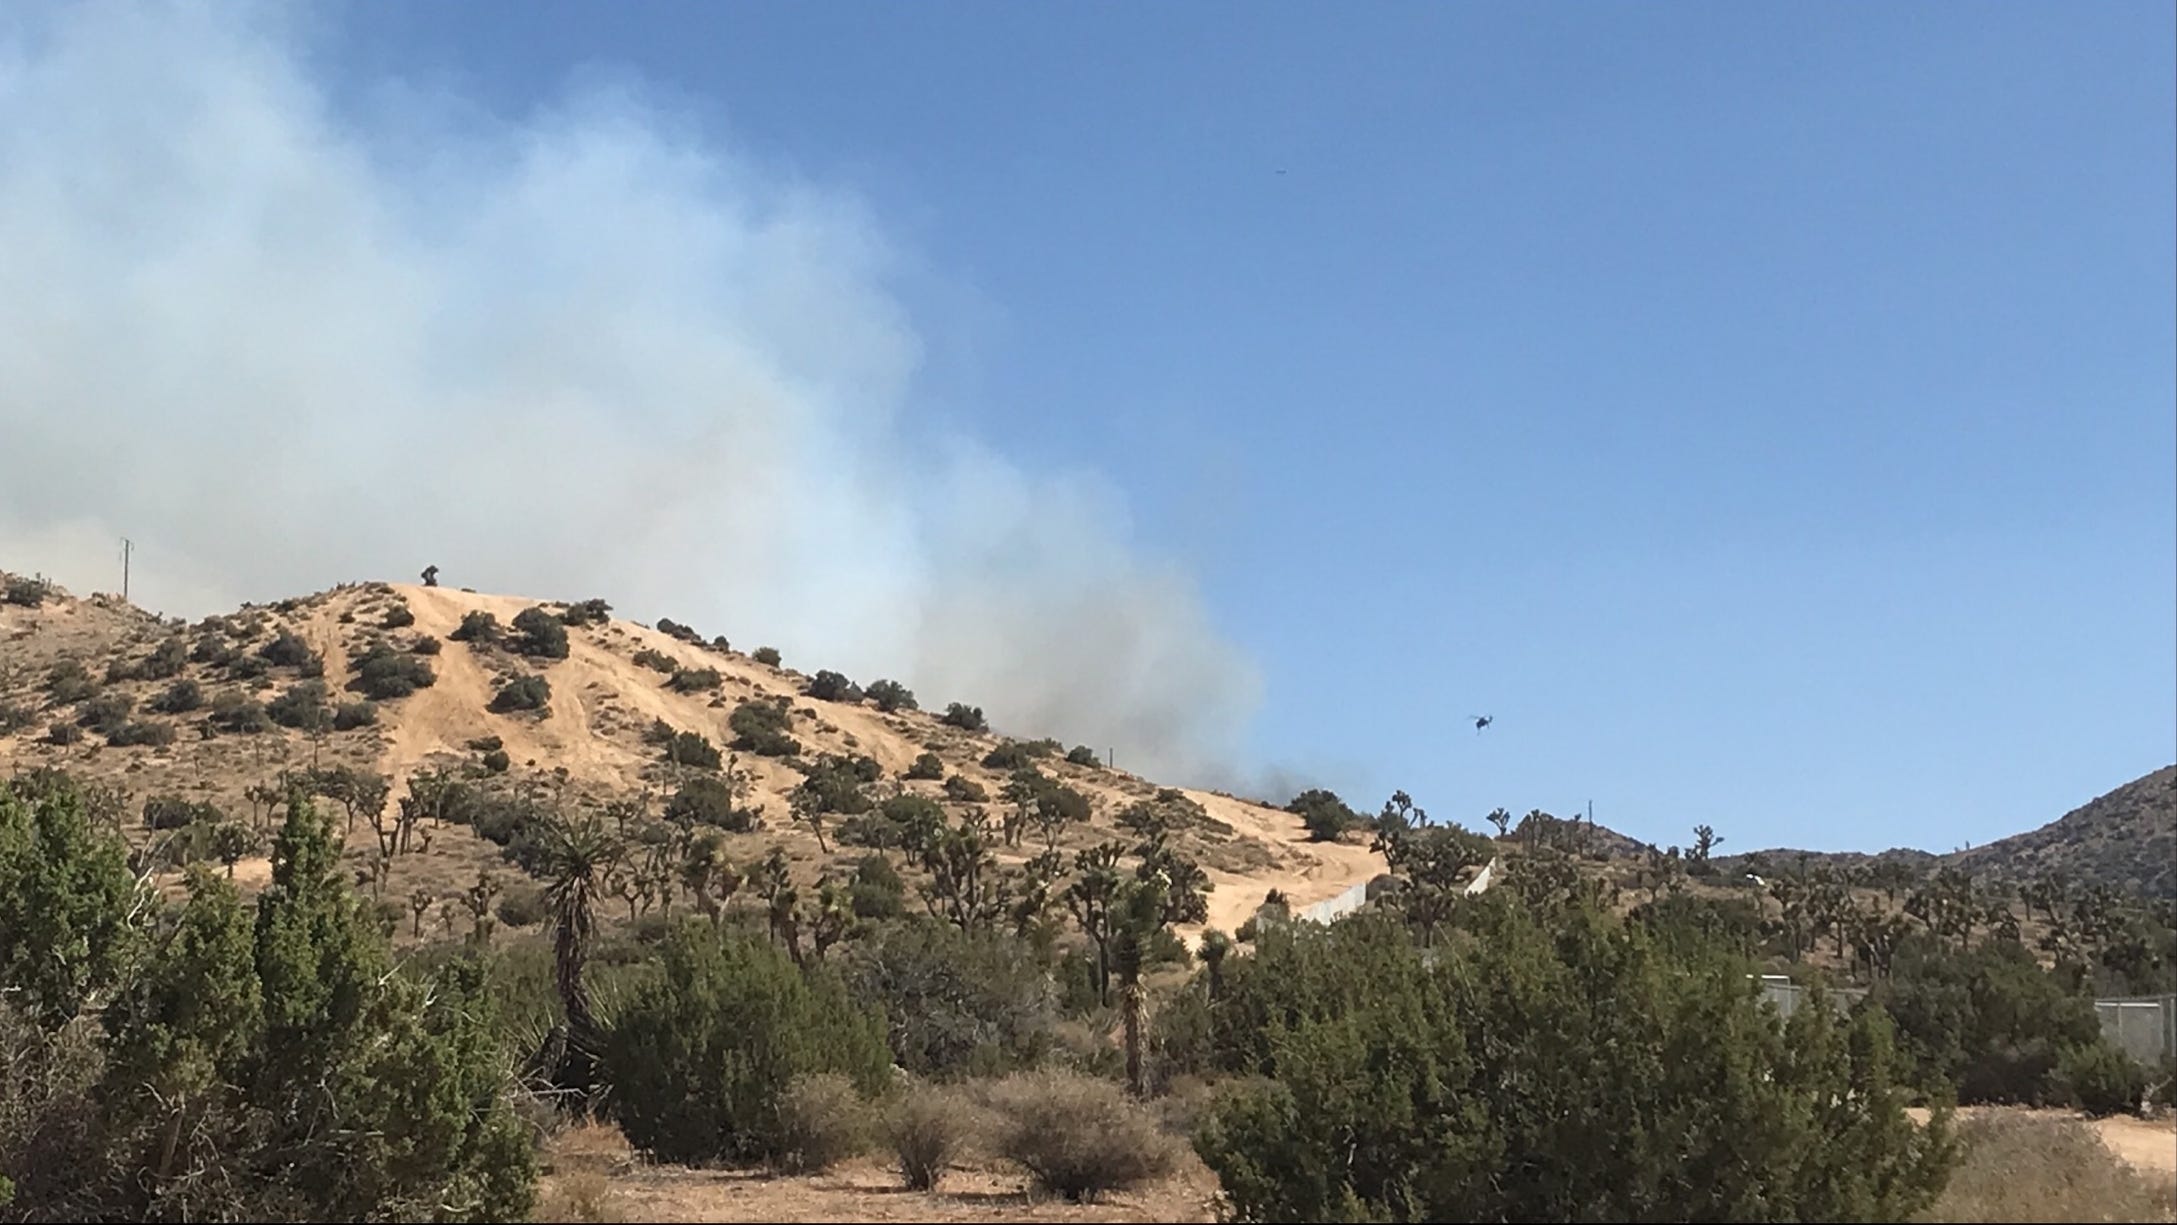 Two arrested for fastmoving fire that threatened Yucca Valley homes